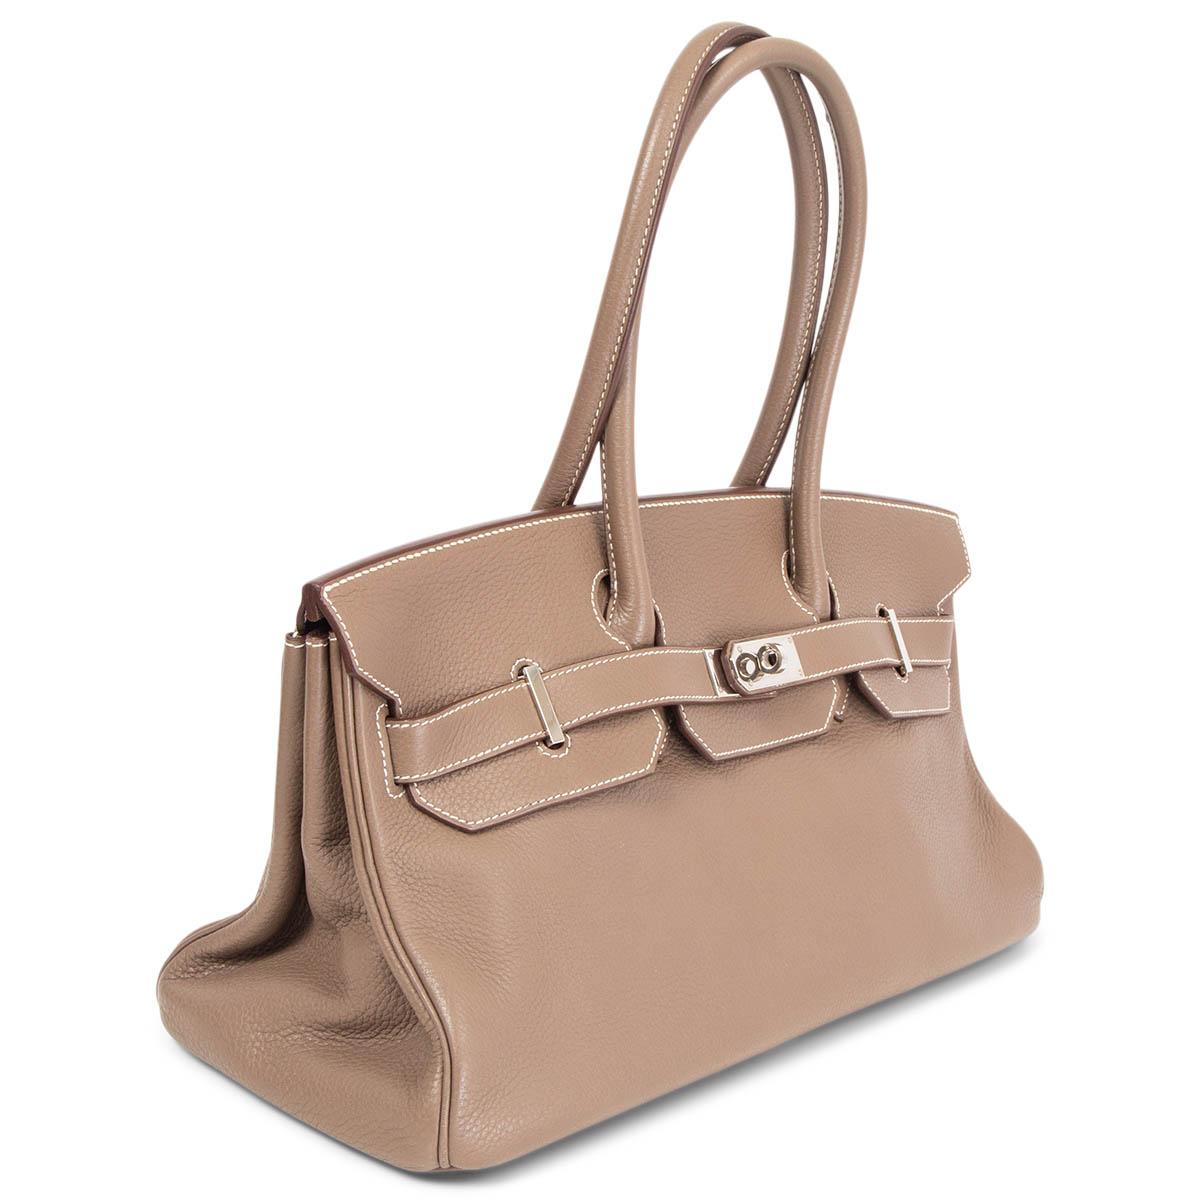 100% authentic Hermès 'JPG I Shoulder Birkin' bag in Etoupe (taupe) Clemence leather with contrasting white stitching and palladium hardware. Lined in Chevre (goat skin) with two open pockets against the front and a zipper pocket against the back.